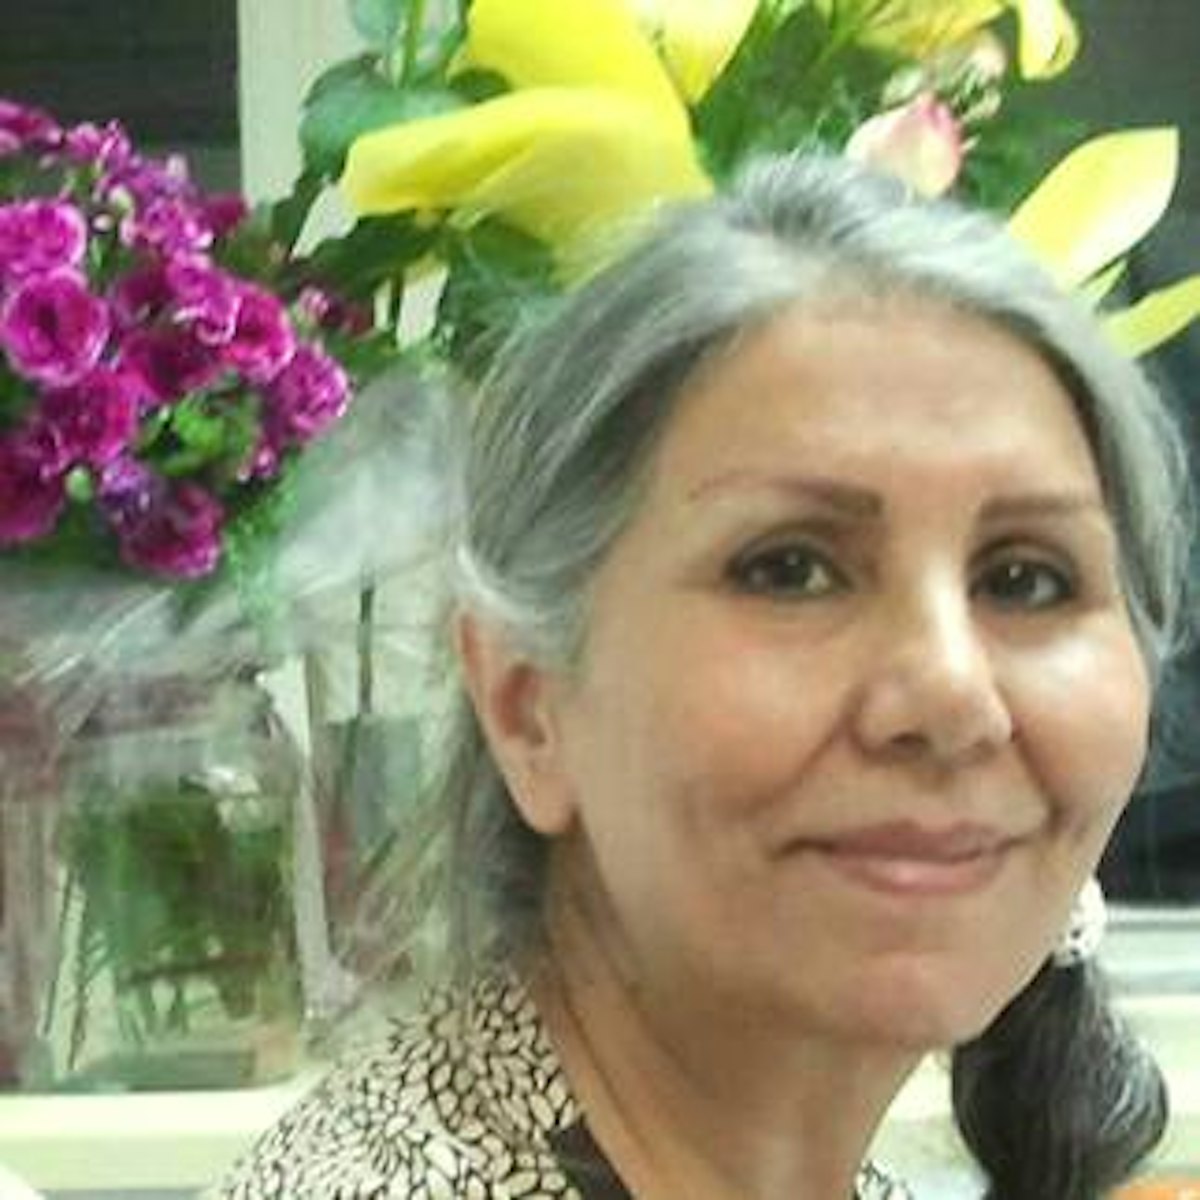 A photograph of Mahvash Sabet, a teacher, educator, and one of the seven Iranian Baha'i leaders in Iran who have been imprisoned since 2008.